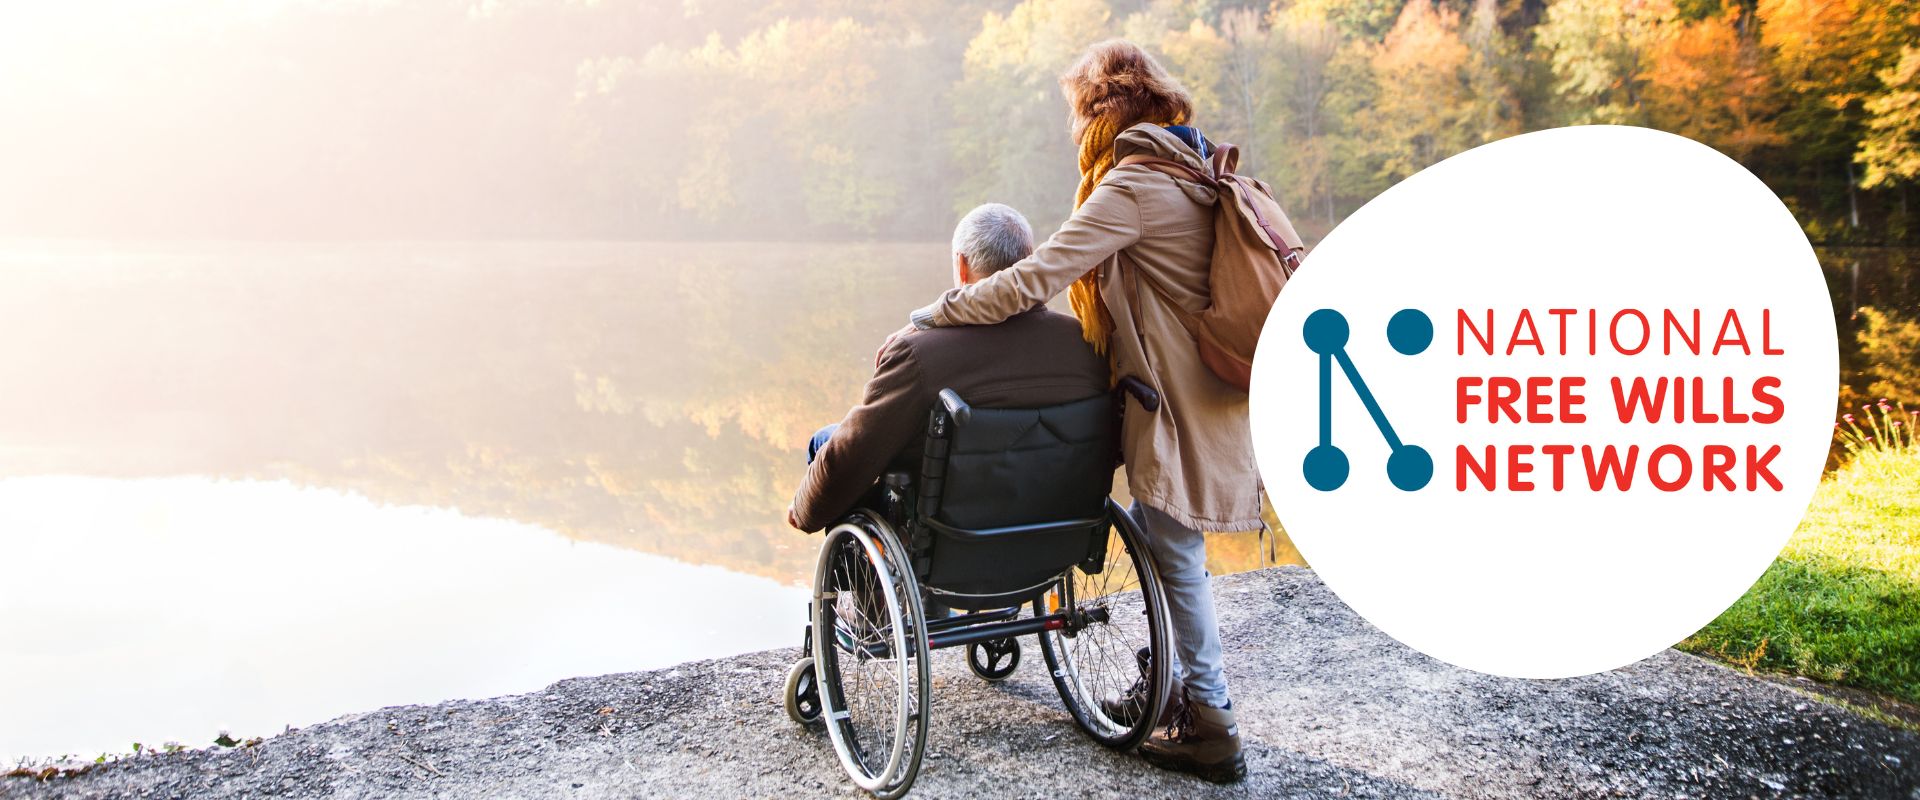 Woman standing next to man in wheelchair, both overlooking a lake with autumn foliage in the background. A white bubble with the Free Wills Network logo is overlaid on the righthand side.